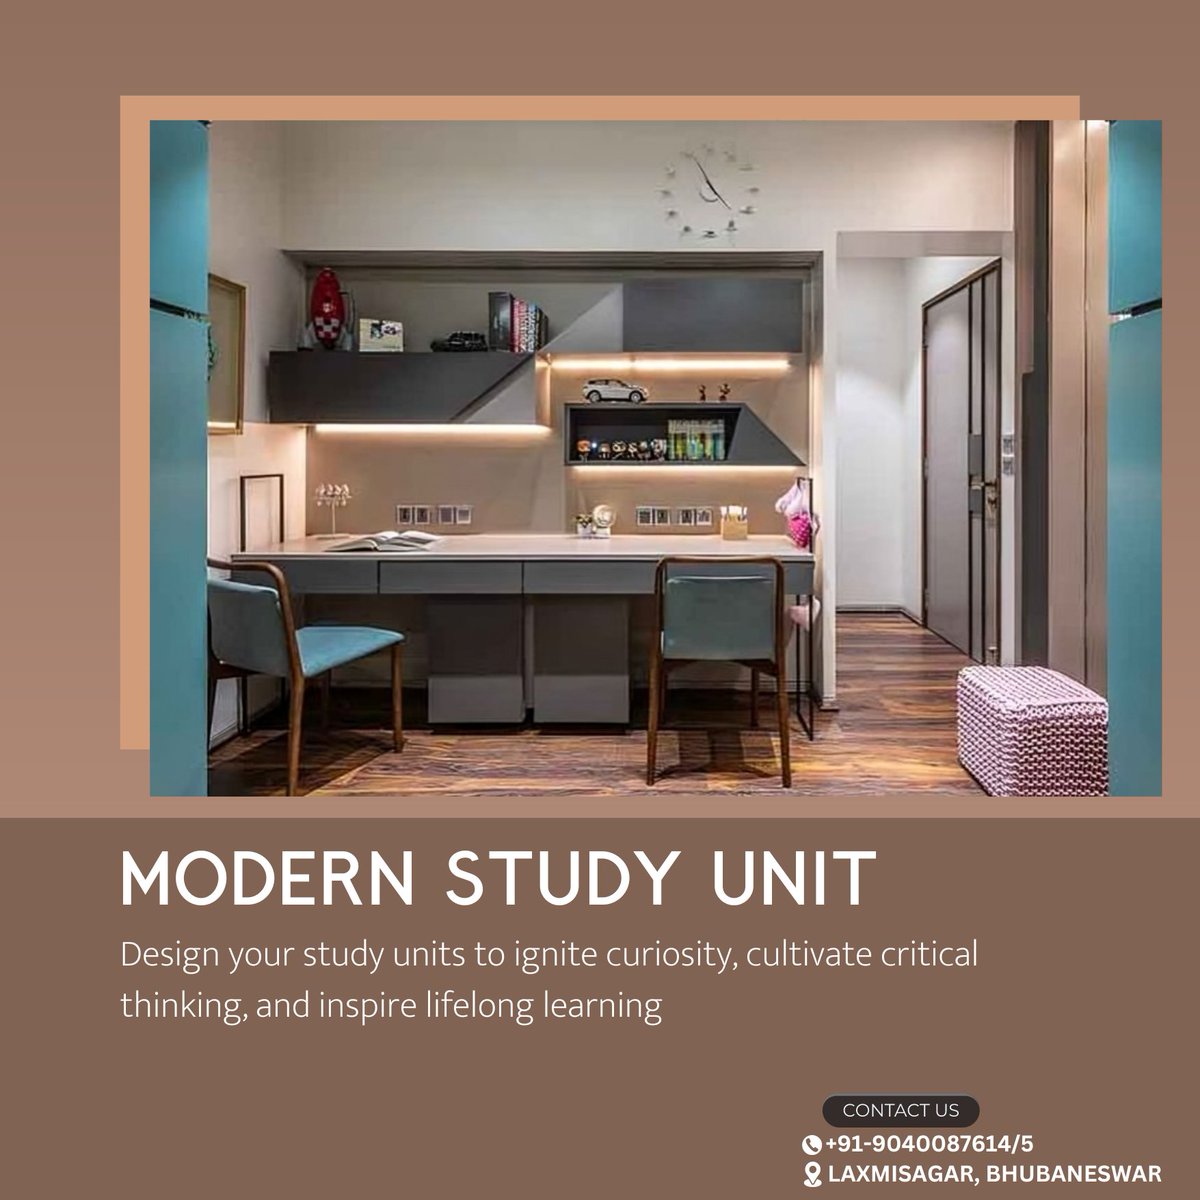 We specialise in Innovative study unit design starts with understanding learners' needs and aspirations, then tailoring experiences to support their growth. #studyunitdesign #studyroom #studyunit #interiors #moderninteriordesign  #interiordesign #vizousinterio #bhubaneswar #india